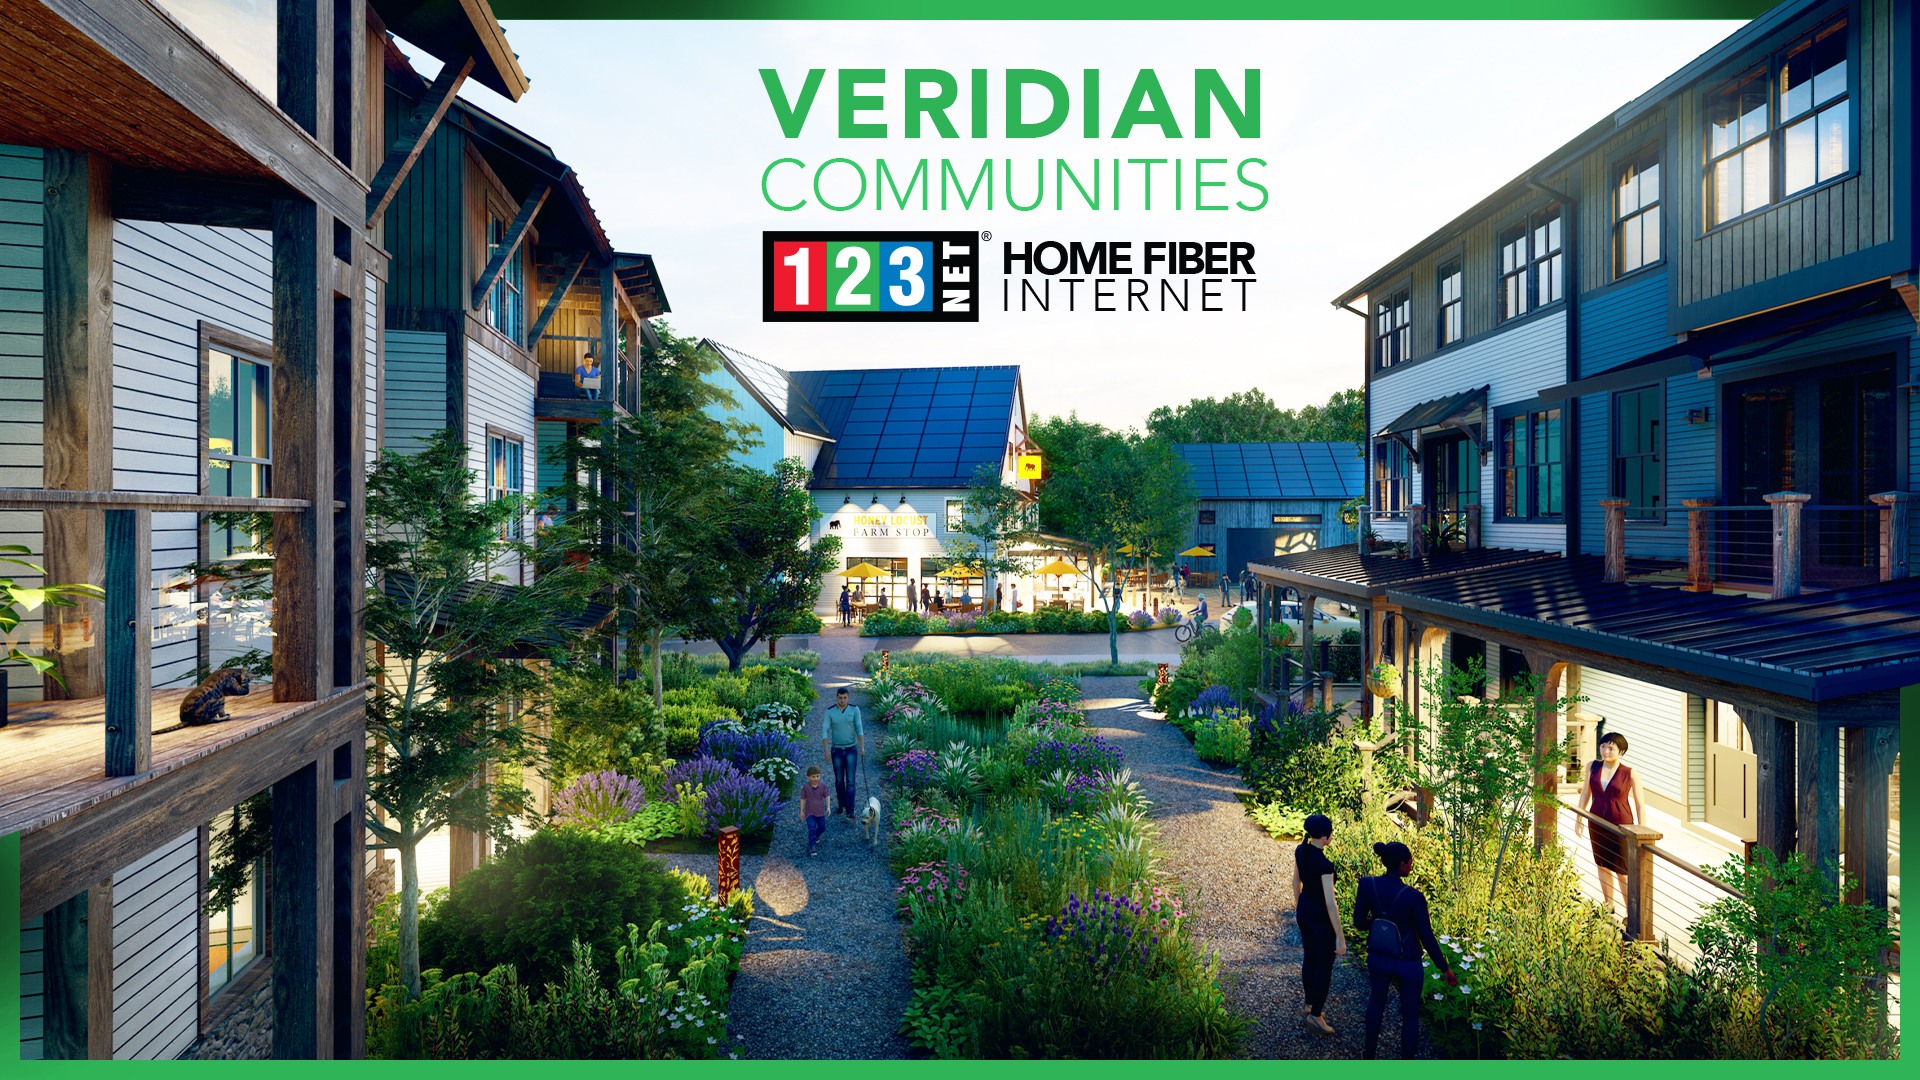 123NET Signs with Veridian Communities to Bring Ultra High Speed 10Gbps Fiber to Ann Arbor Development